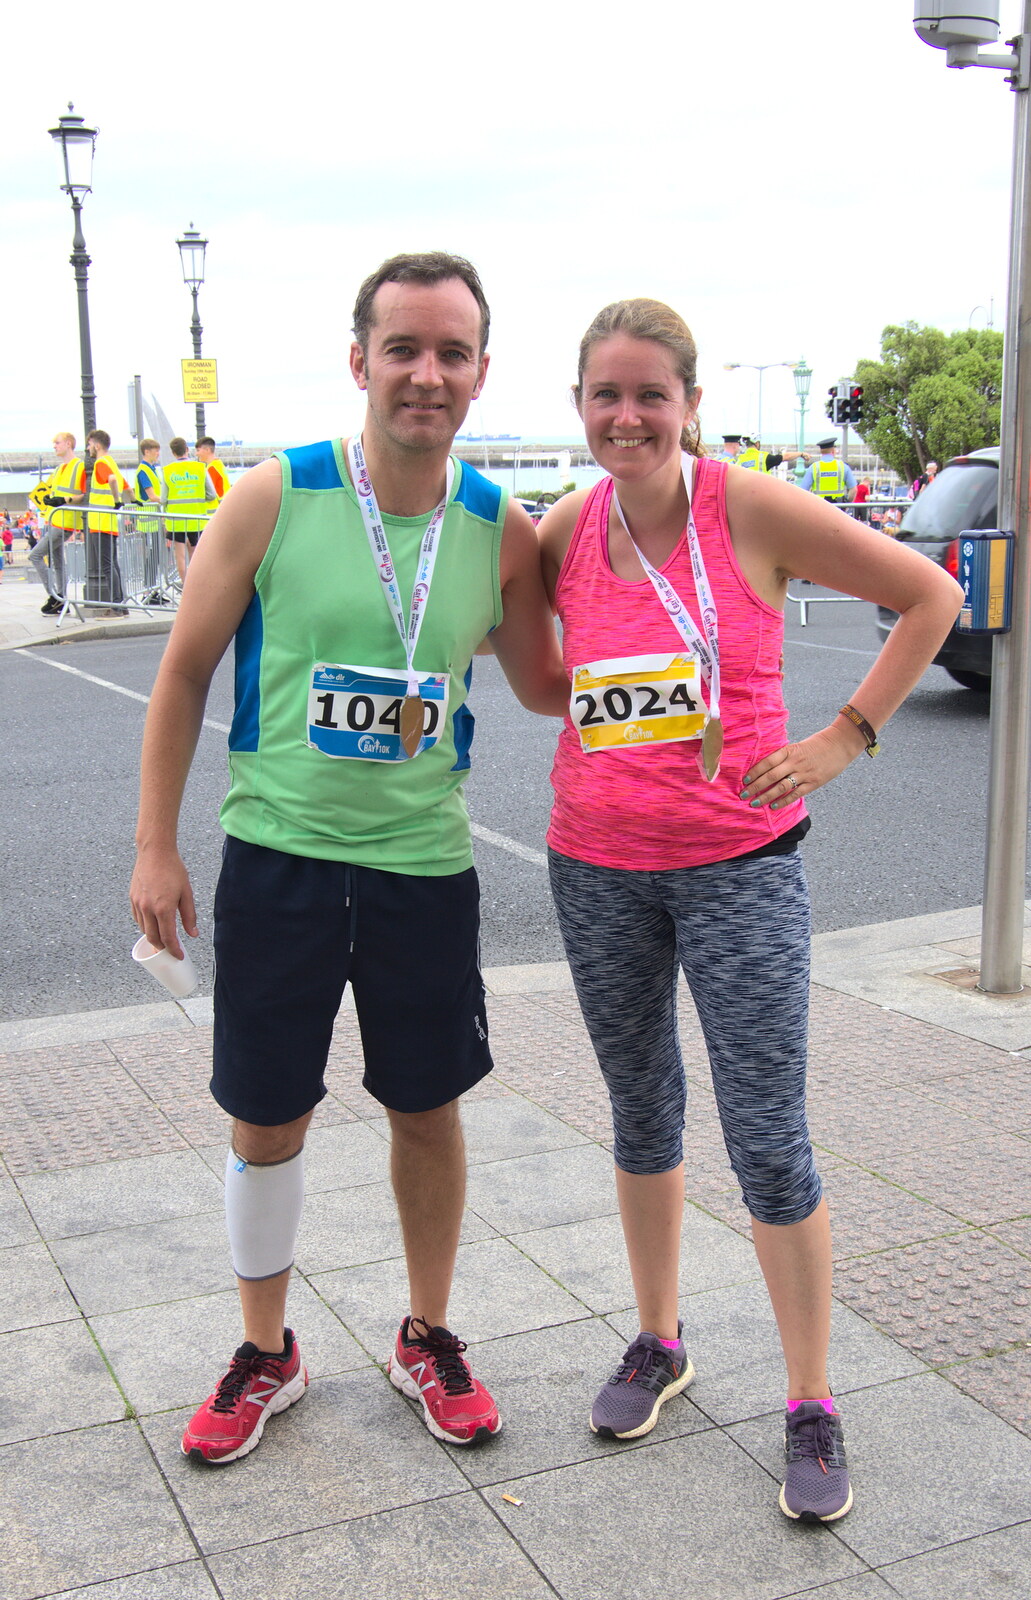 James and Isobel from The Dún Laoghaire 10k Run, County Dublin, Ireland - 6th August 2018